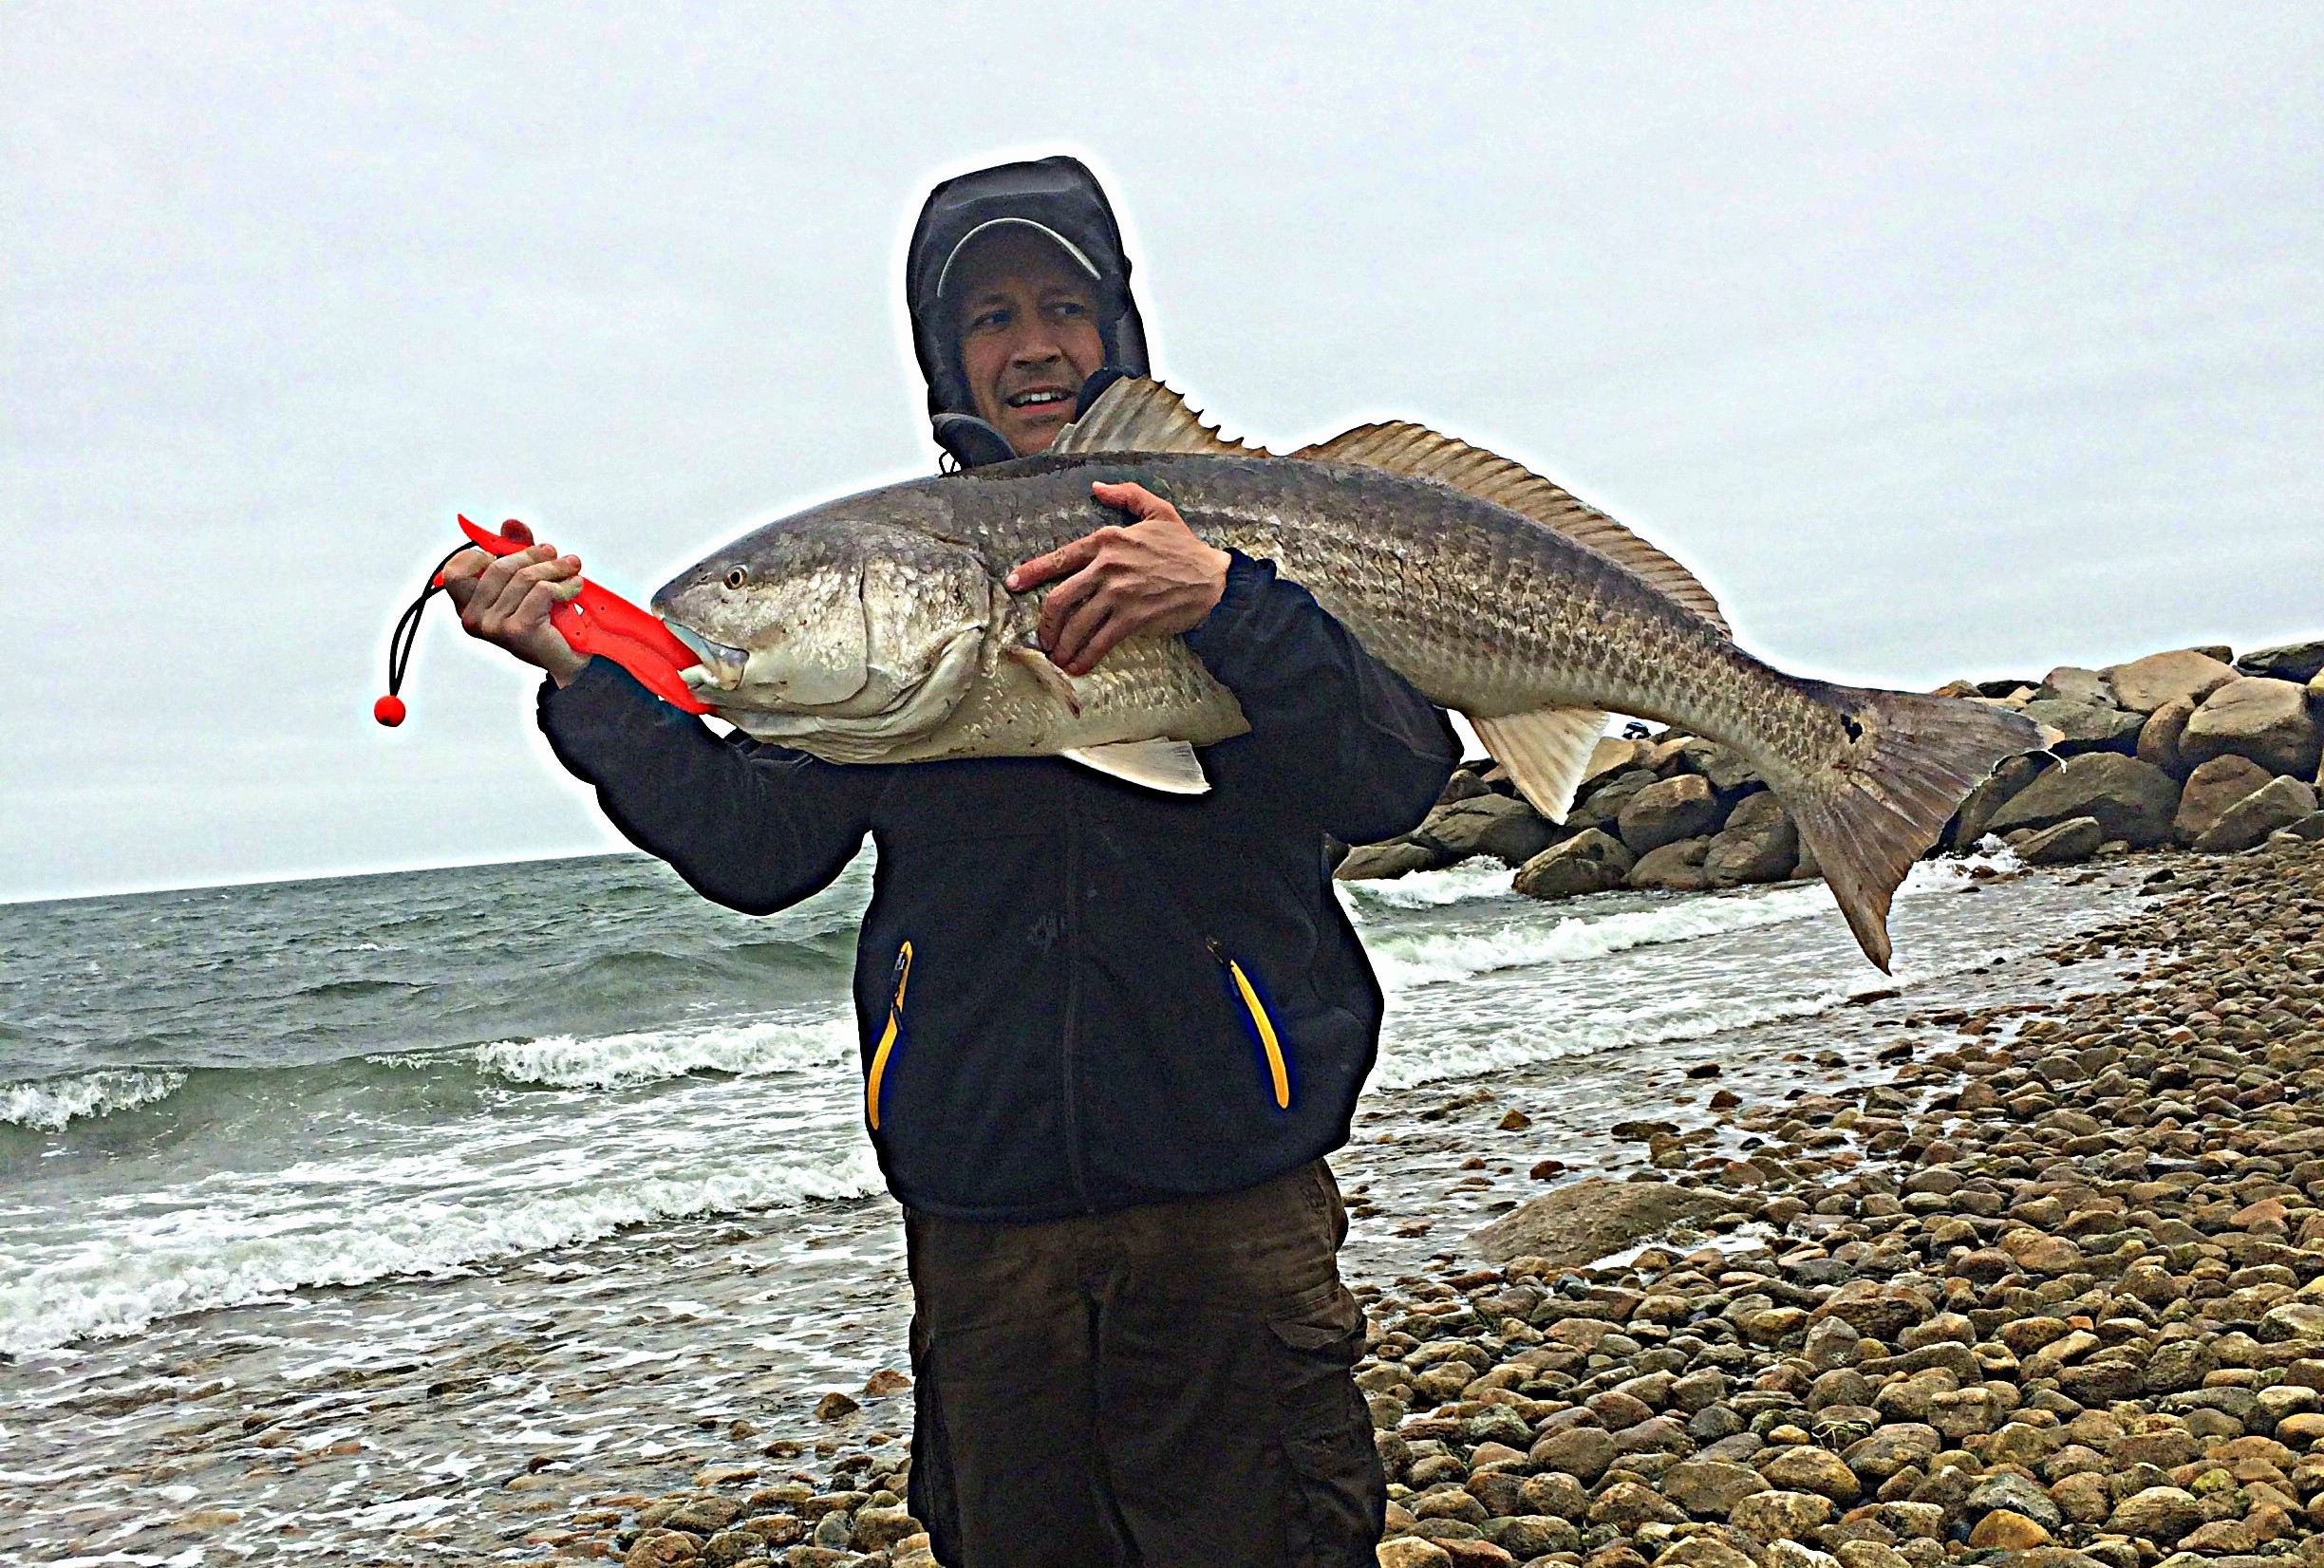 45-Inch Red Drum Caught on Cape Cod - On The Water